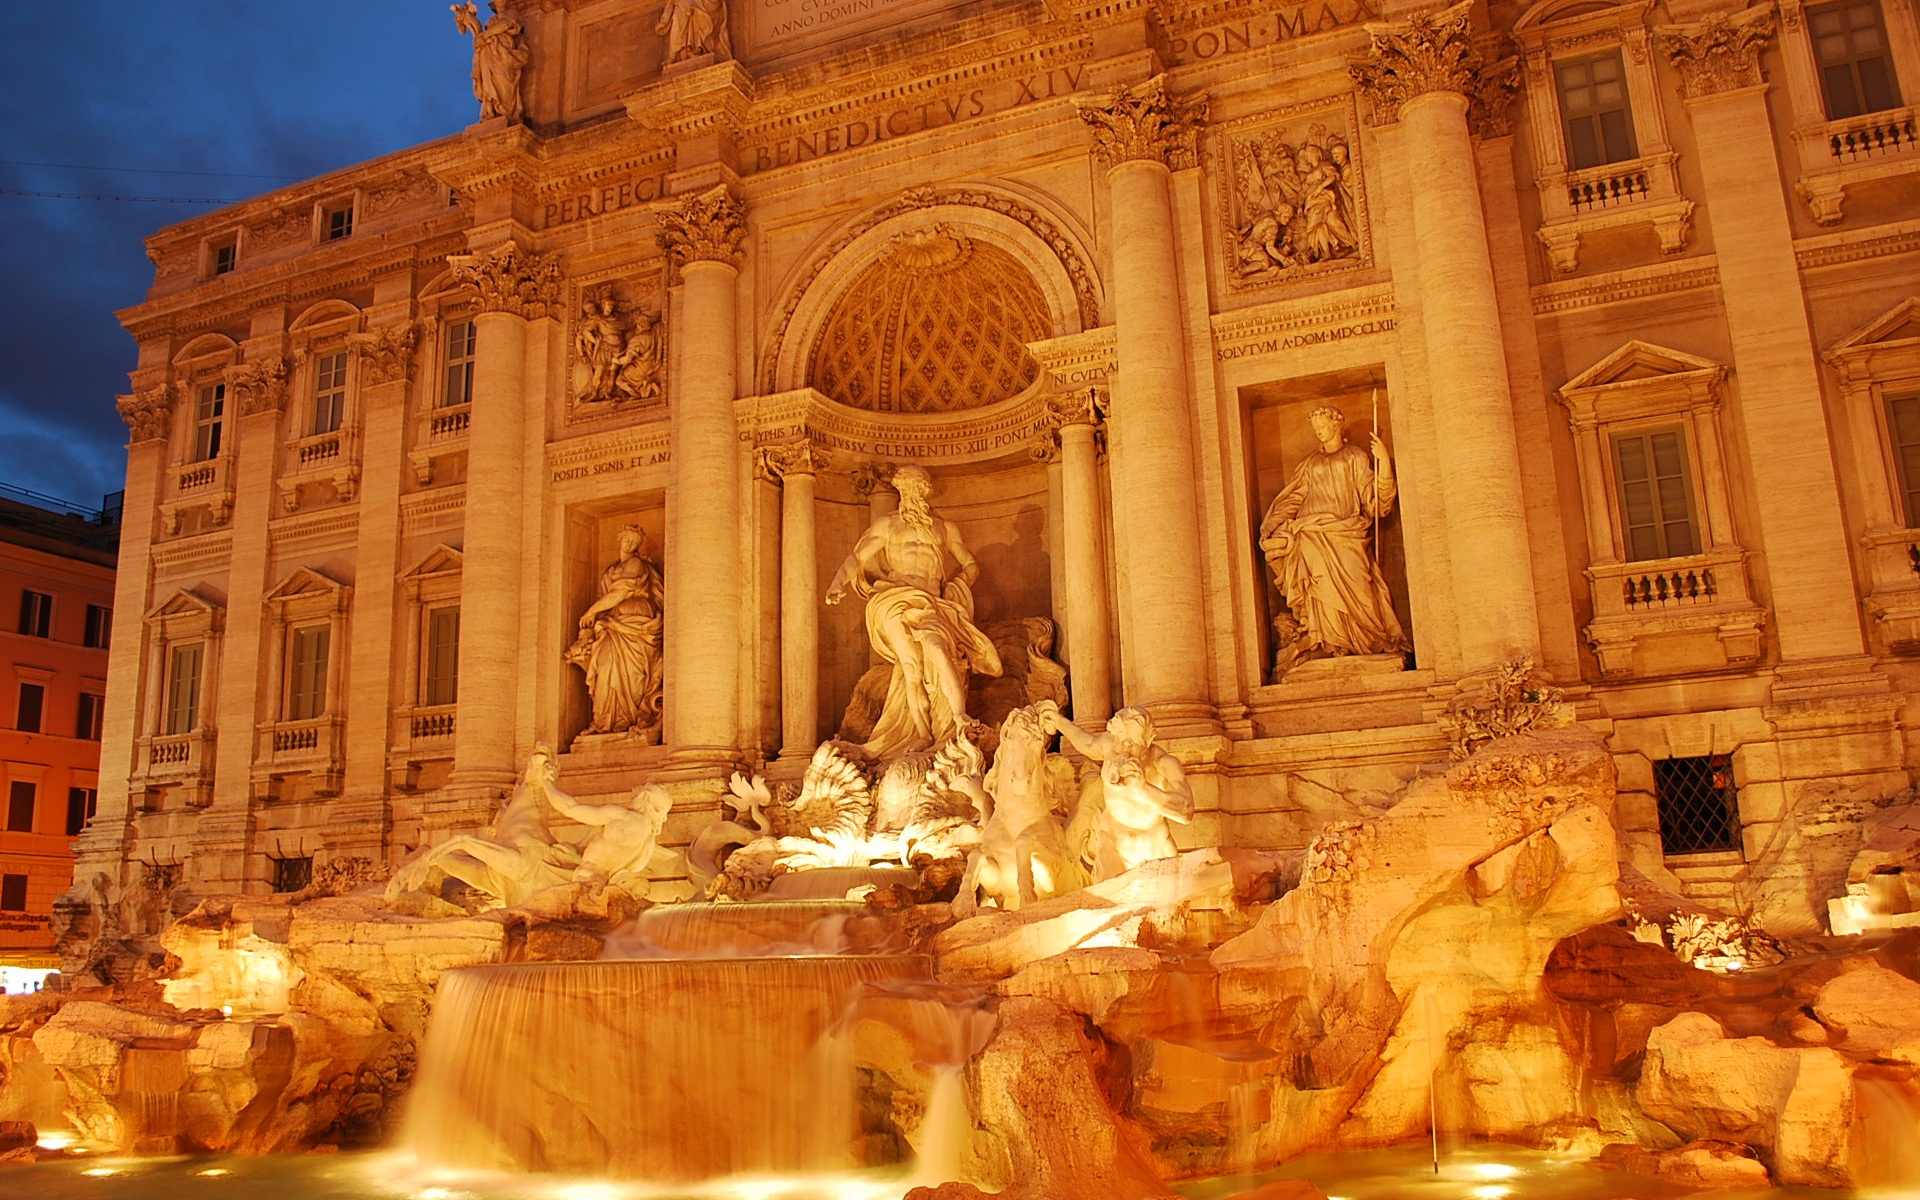 statue, man made, trevi fountain, building, monuments